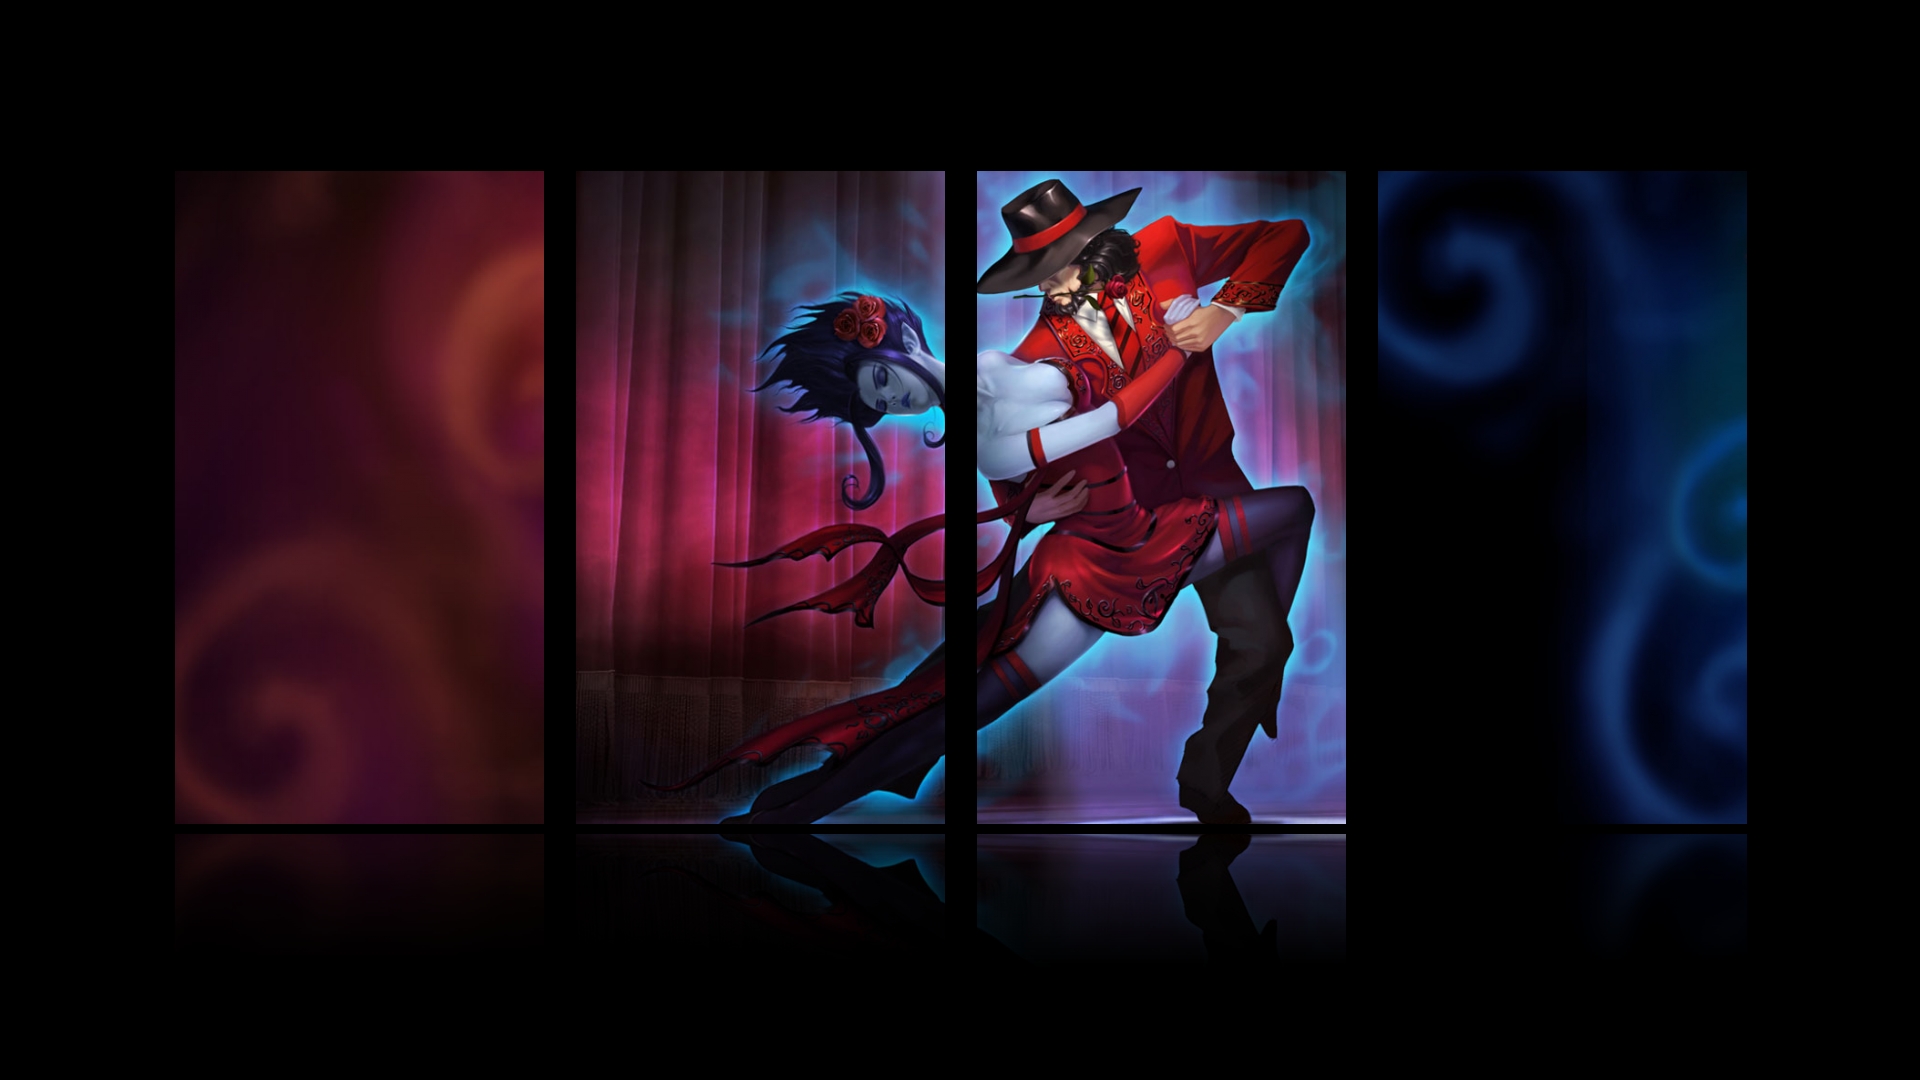 video game, league of legends, evelynn (league of legends), twisted fate (league of legends)